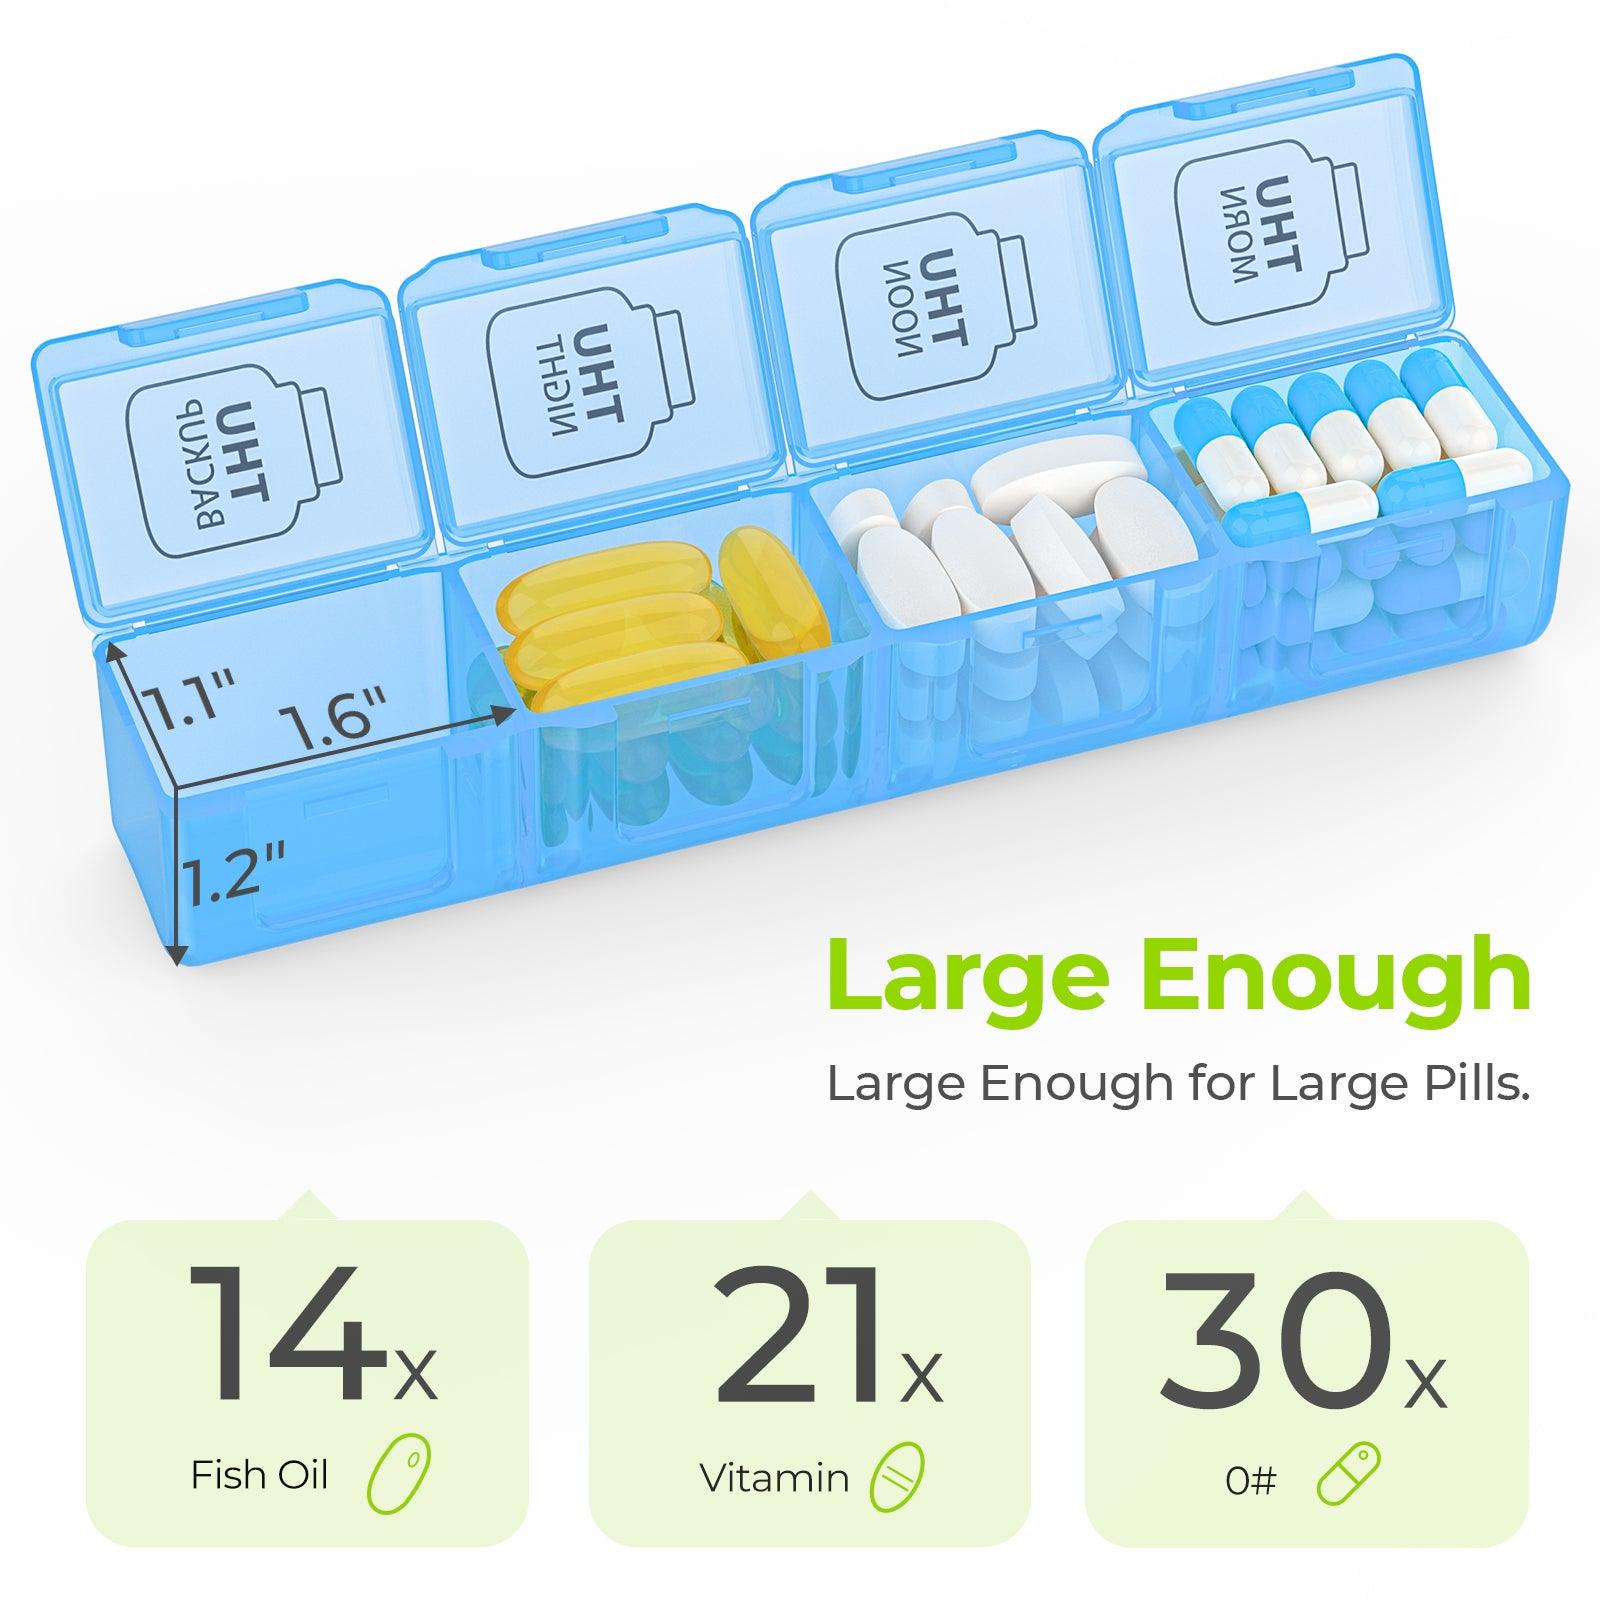 AUVON XL Weekly Pill Organizer 2 Times a Day, Pill Box 7 Day with